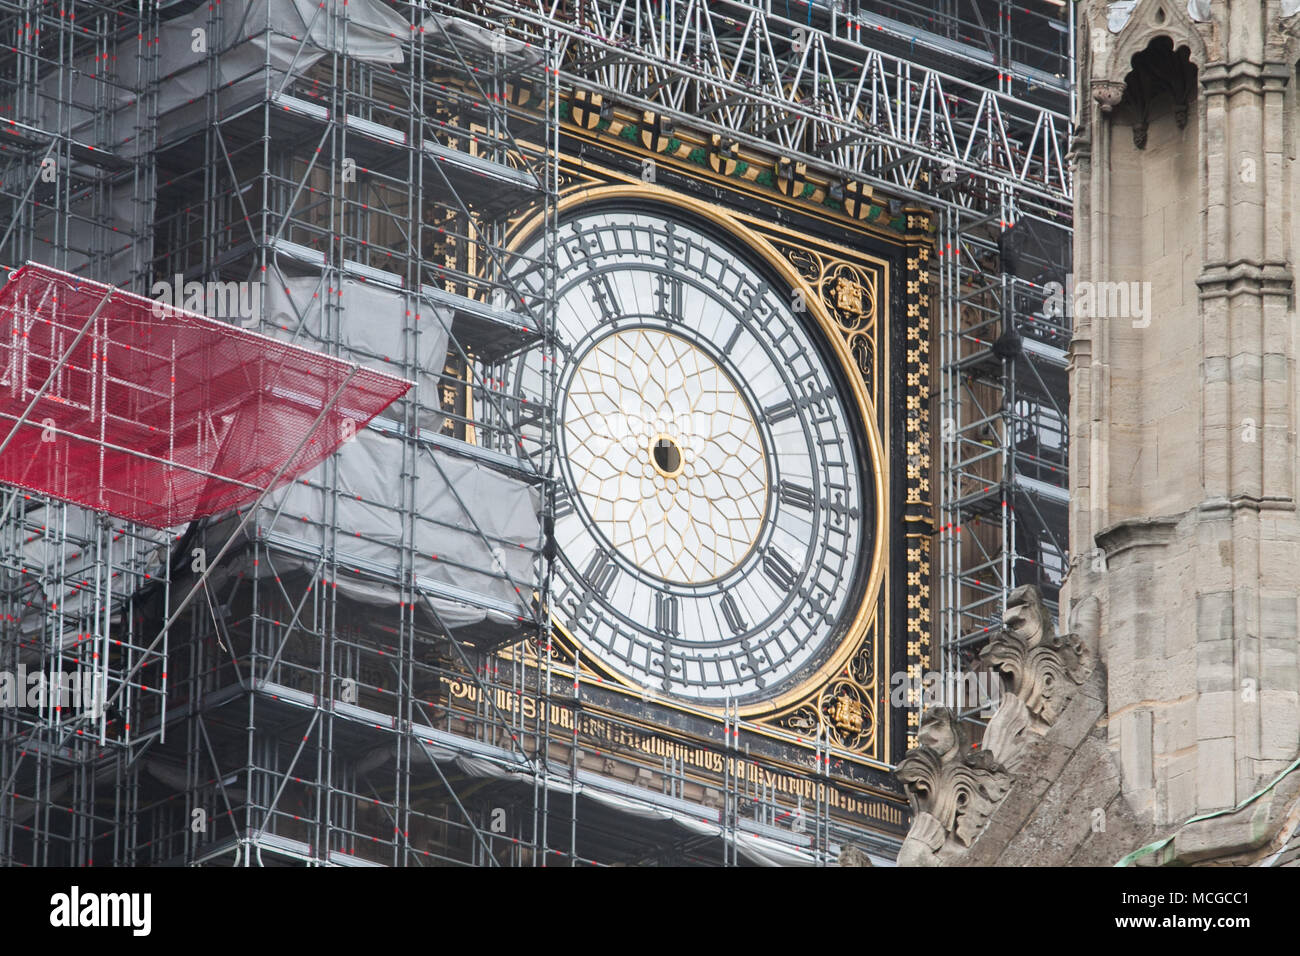 London UK. 16th April 2018.  Big Ben clock face with the hands removed as part of refubishment as politicians and Members of Parliament return from their Easter break and Prime Minister Theresa May faces difficult questions over the military strikes in Syria over the weekend Credit: amer ghazzal/Alamy Live News Stock Photo